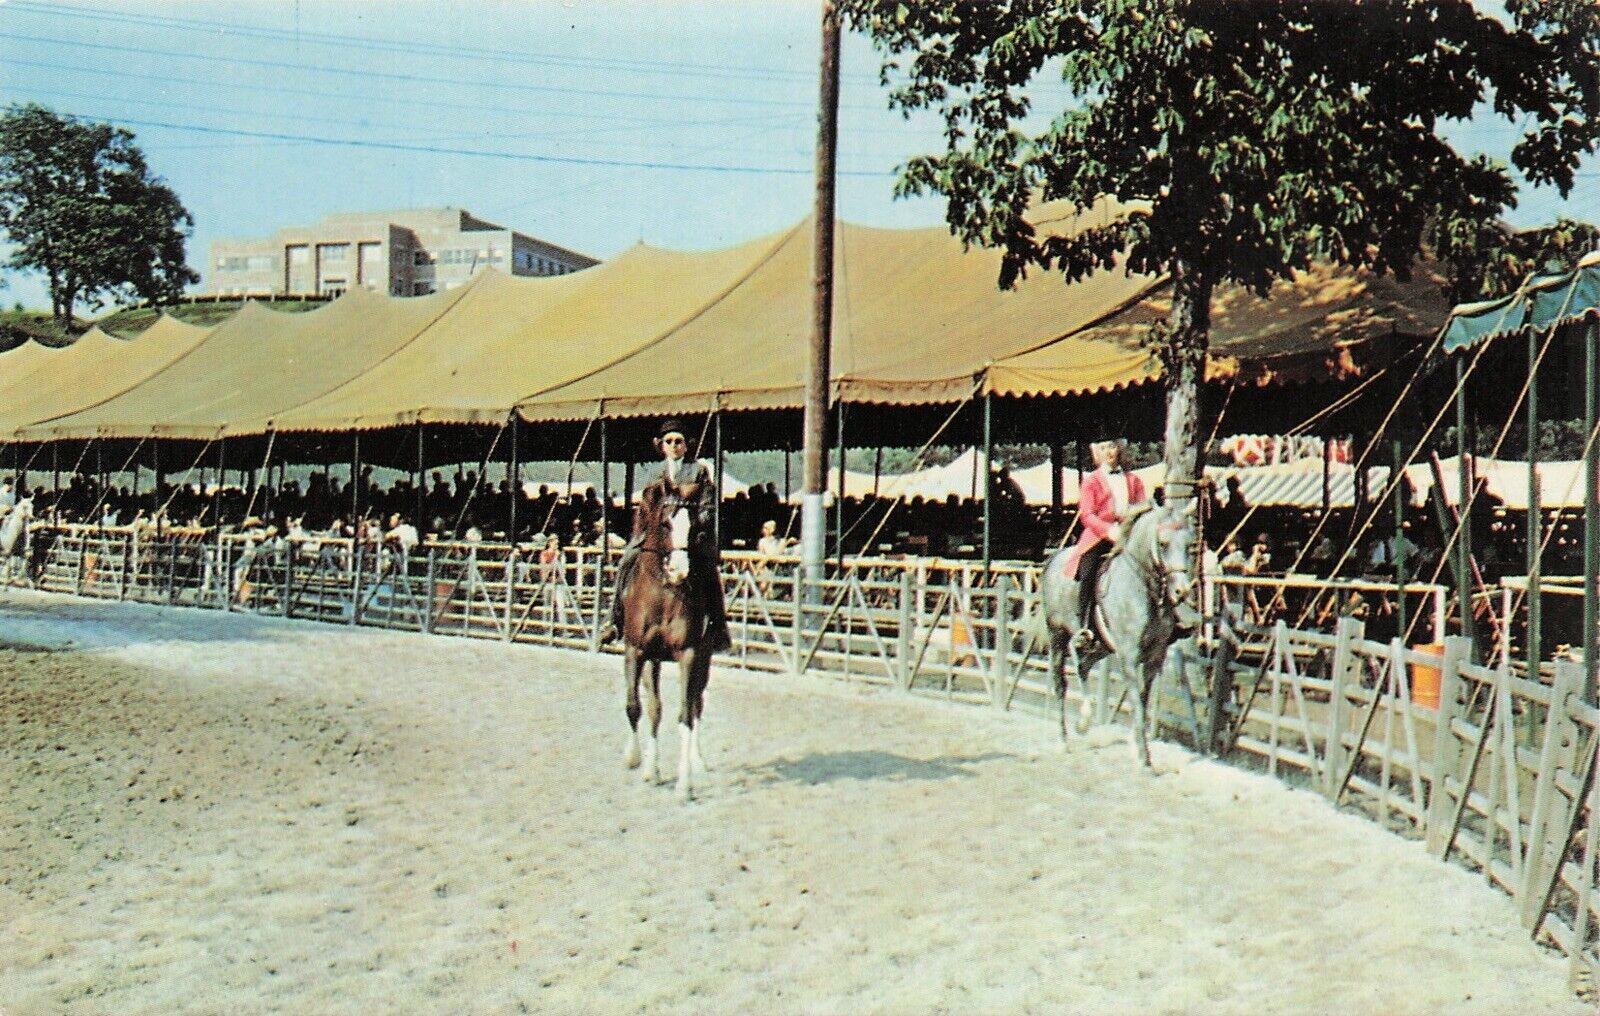 Sussex County Farm And Horse Show Riders Branchville New Jersey 1970s Postcard